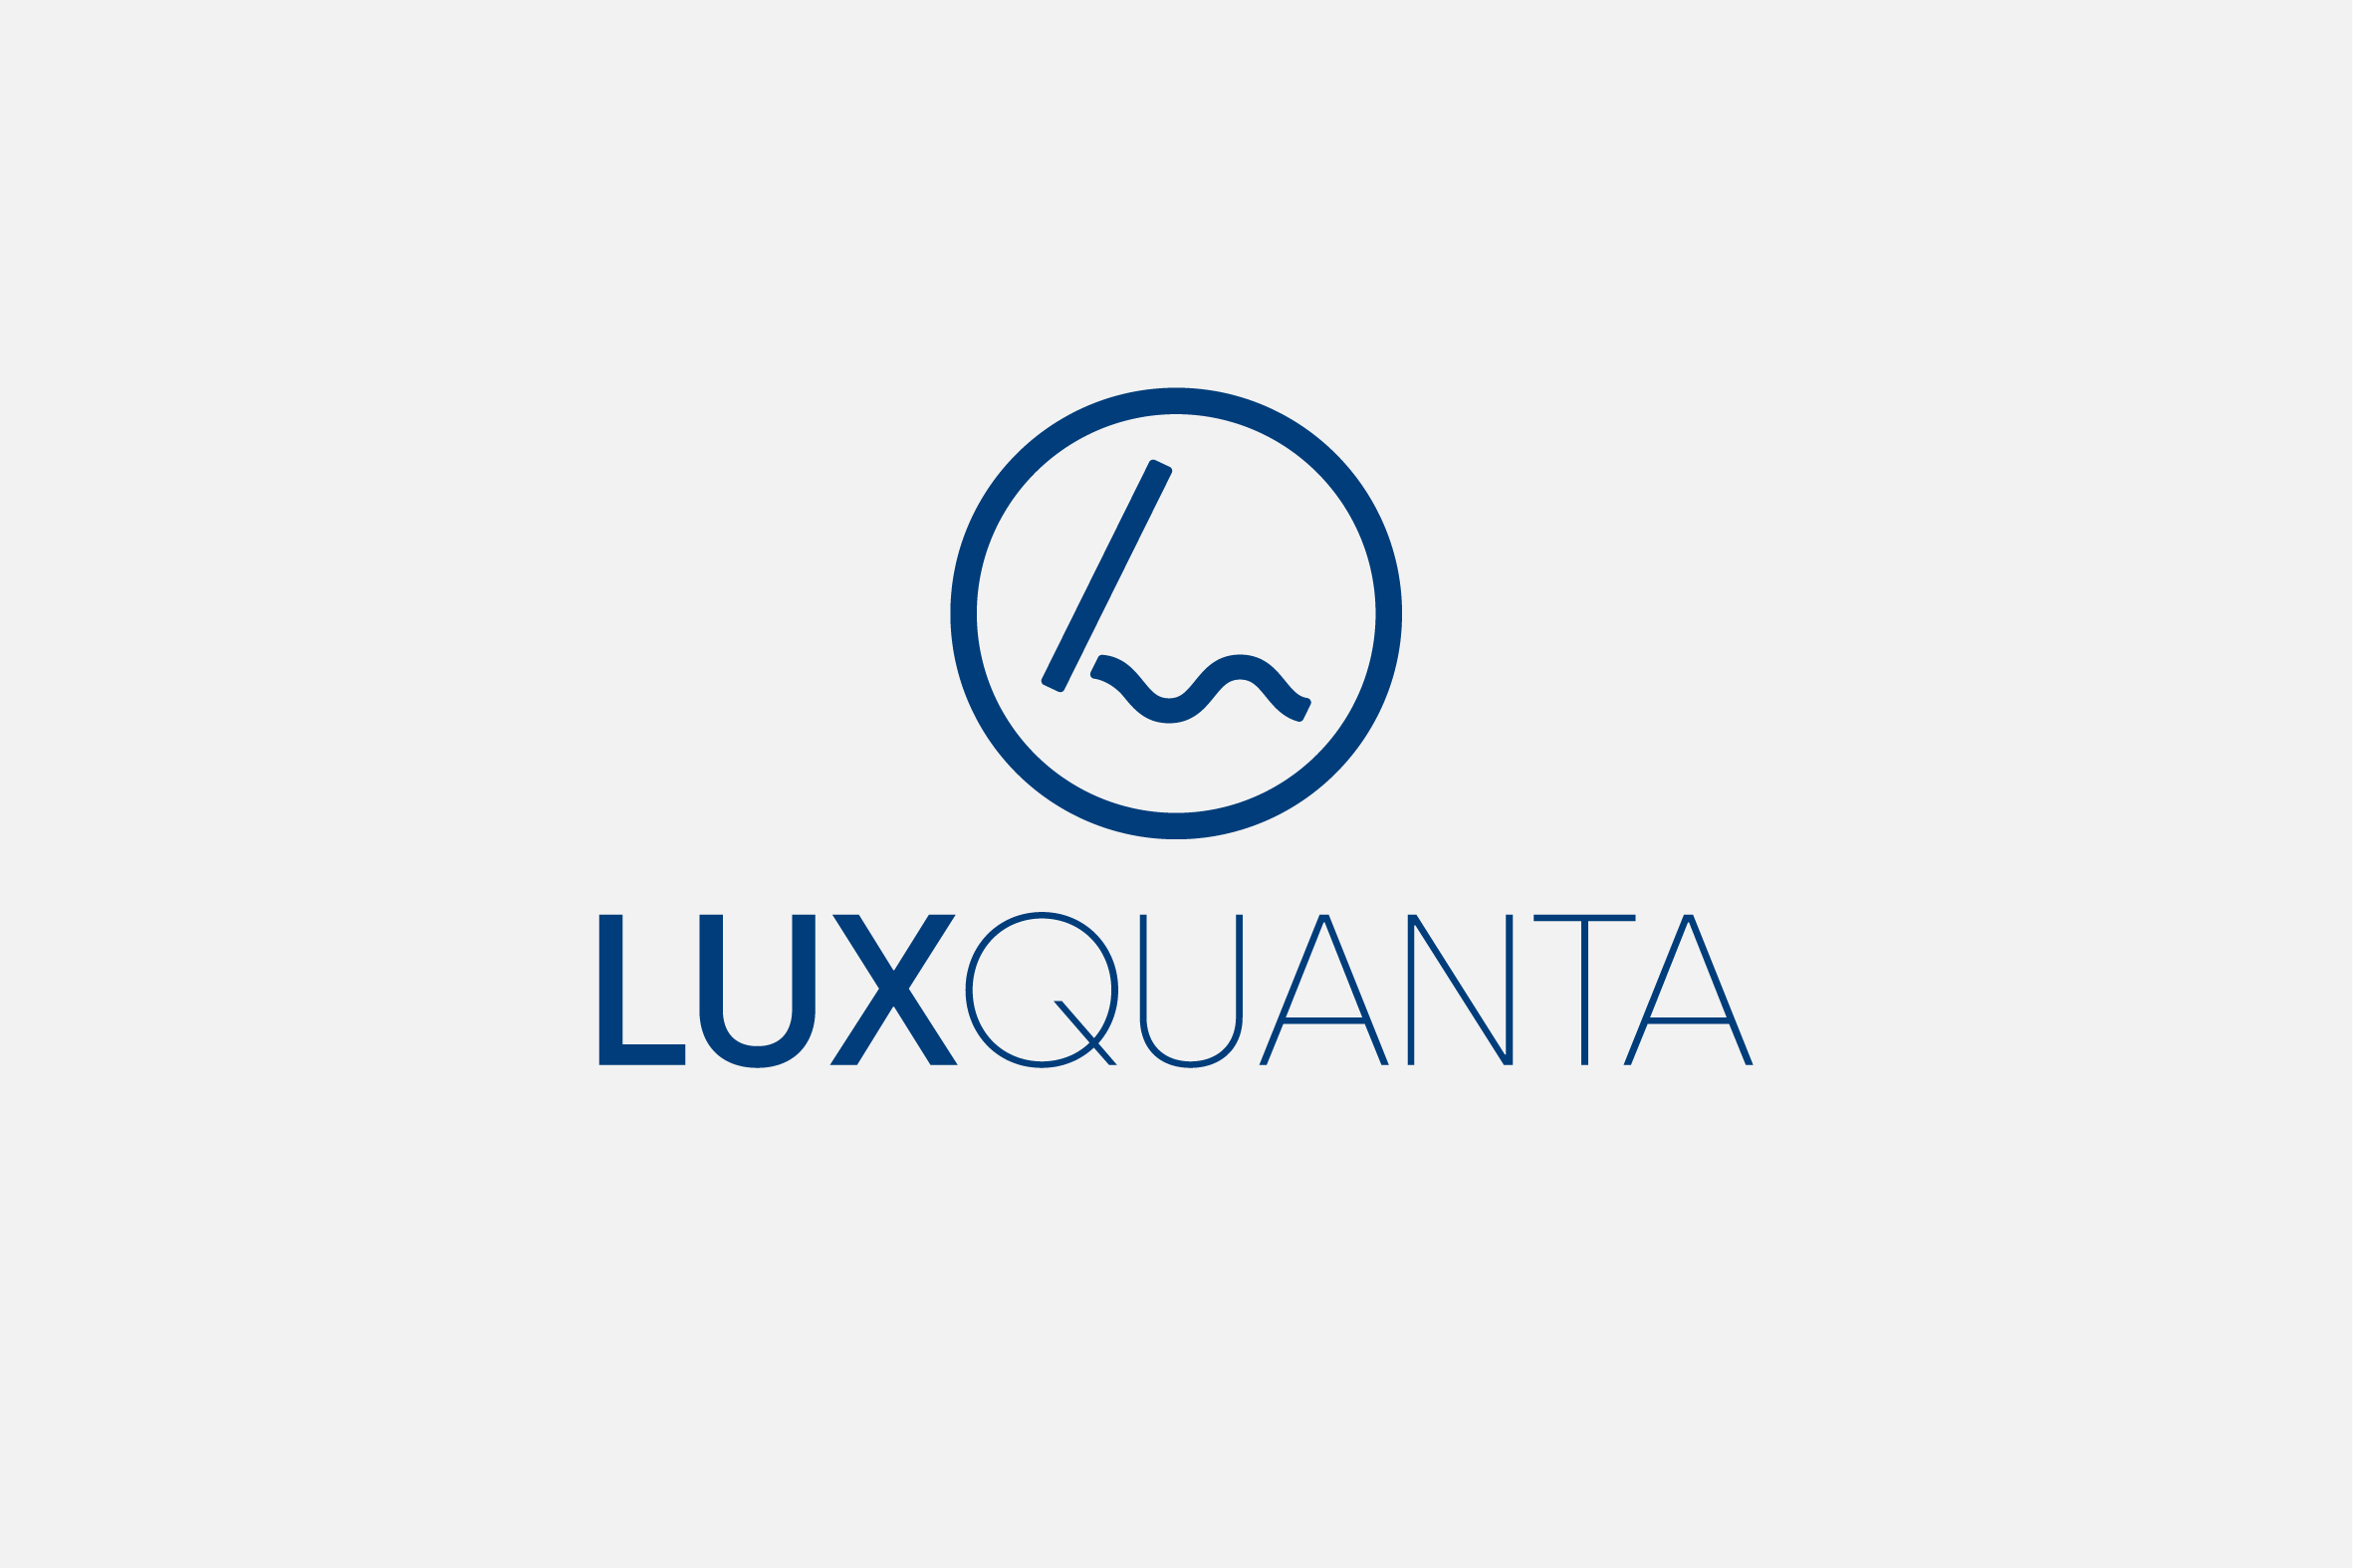 Luxquanta - Graphic Design for Science and Technology